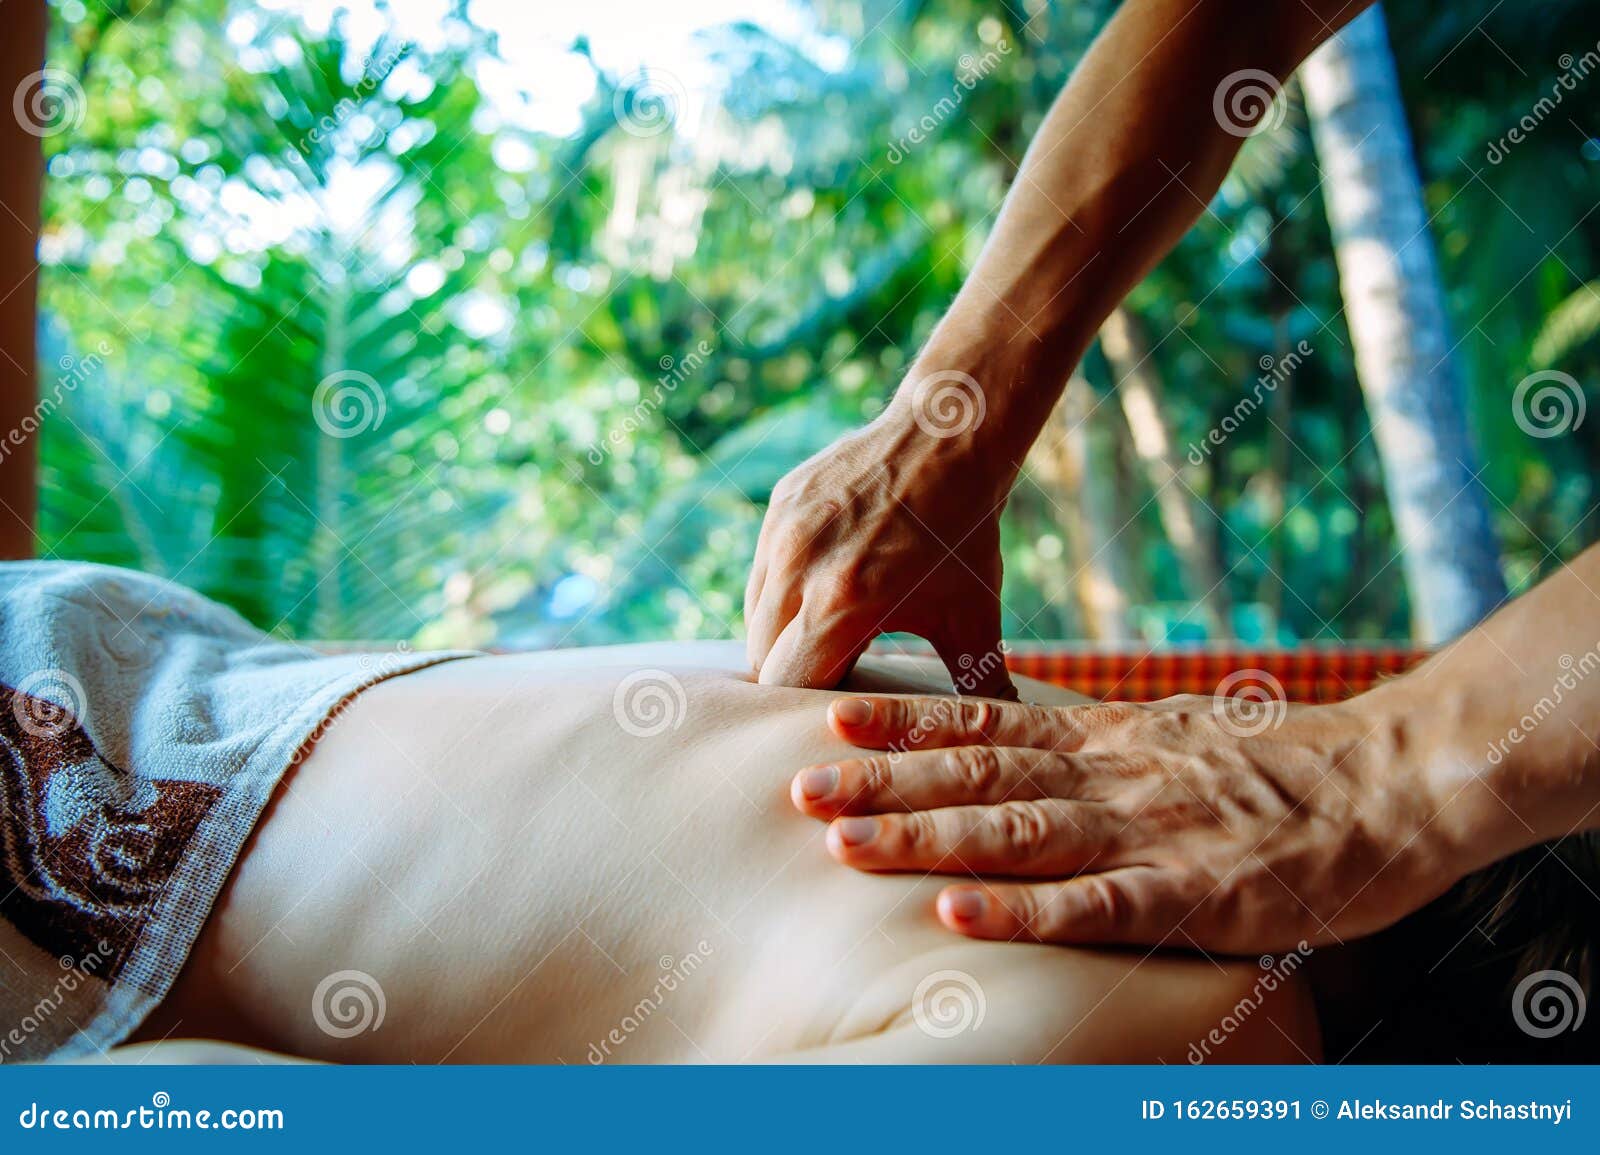 Acupressure Massage In Spa Centre Outdoor Woman At Acupressure Back